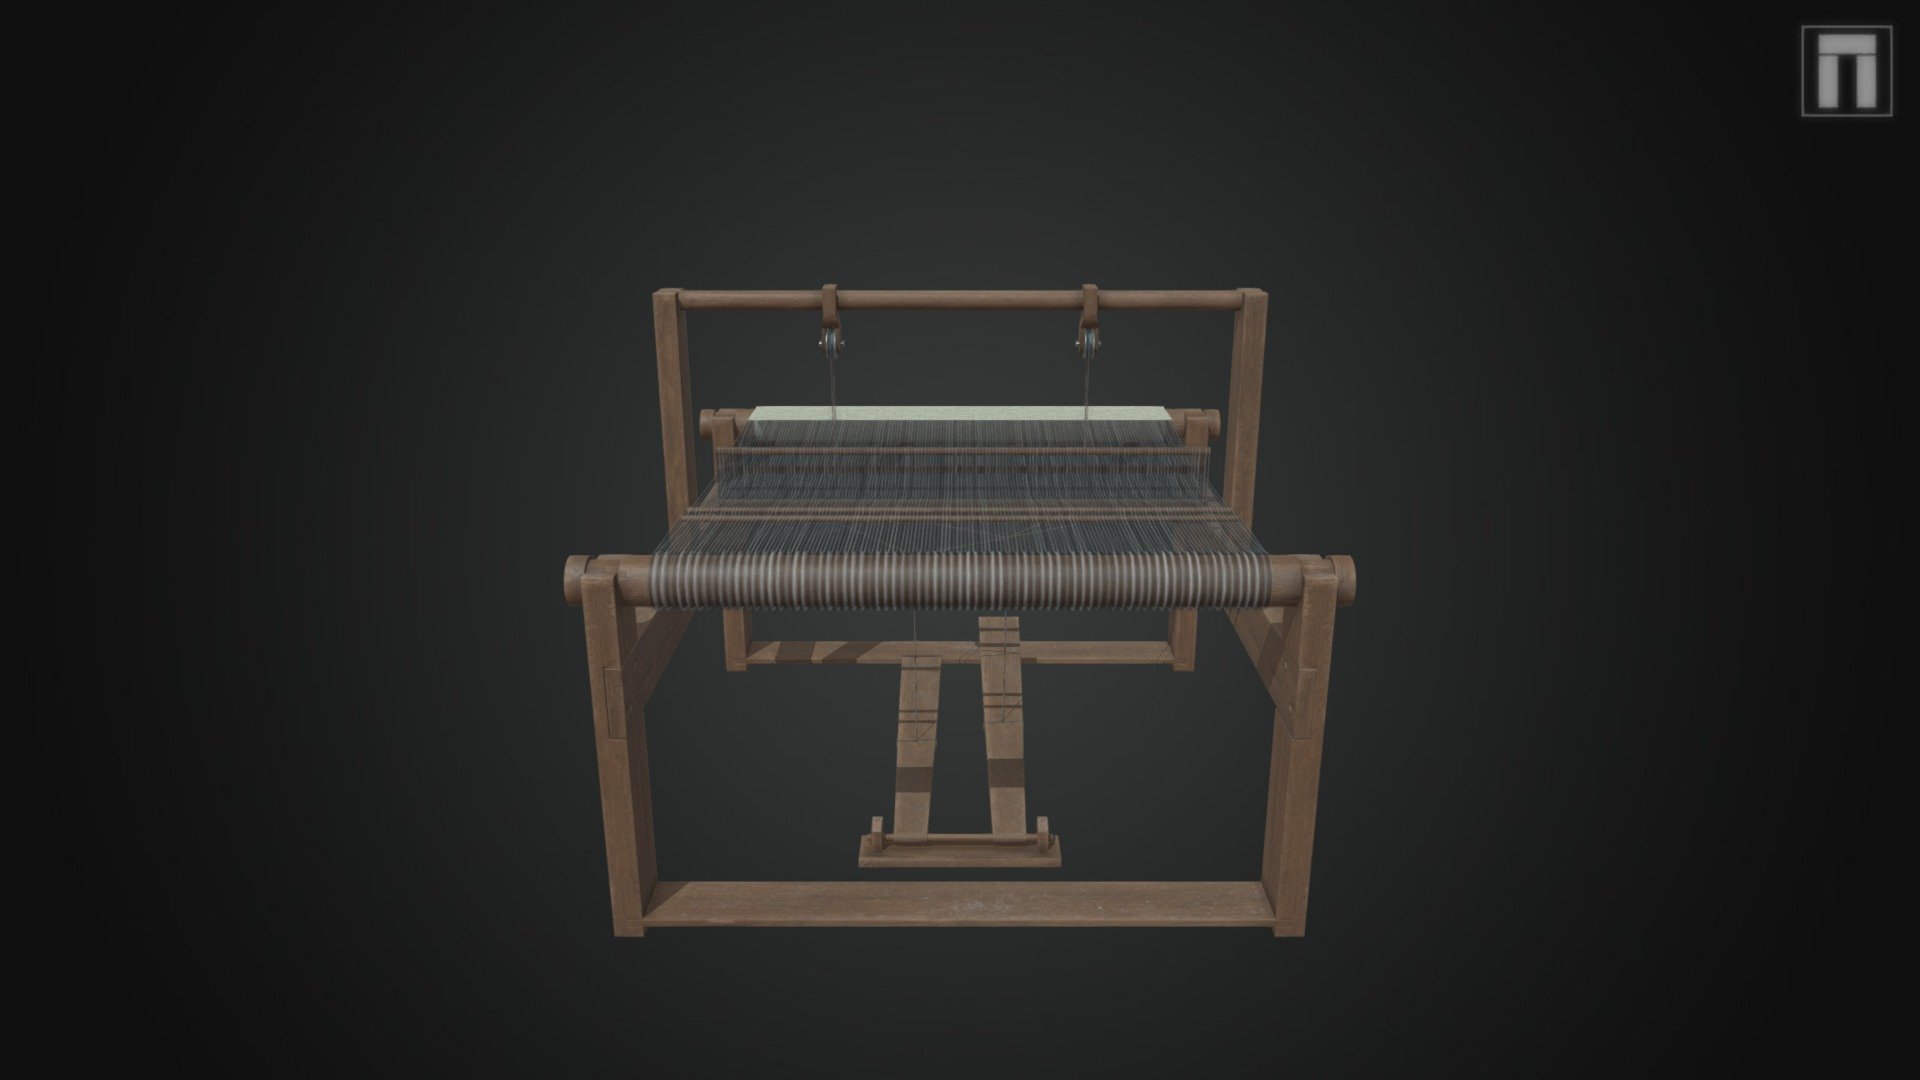 Historical reconstruction of a horizontal loom, typical of what might have been used to weave broad cloth in  15th century England. It is animated to show how it would have worked, with foot peddles pulling the threads up and down. The model is part of an upcoming VR reconstruction and is optimised for real-time 3d model